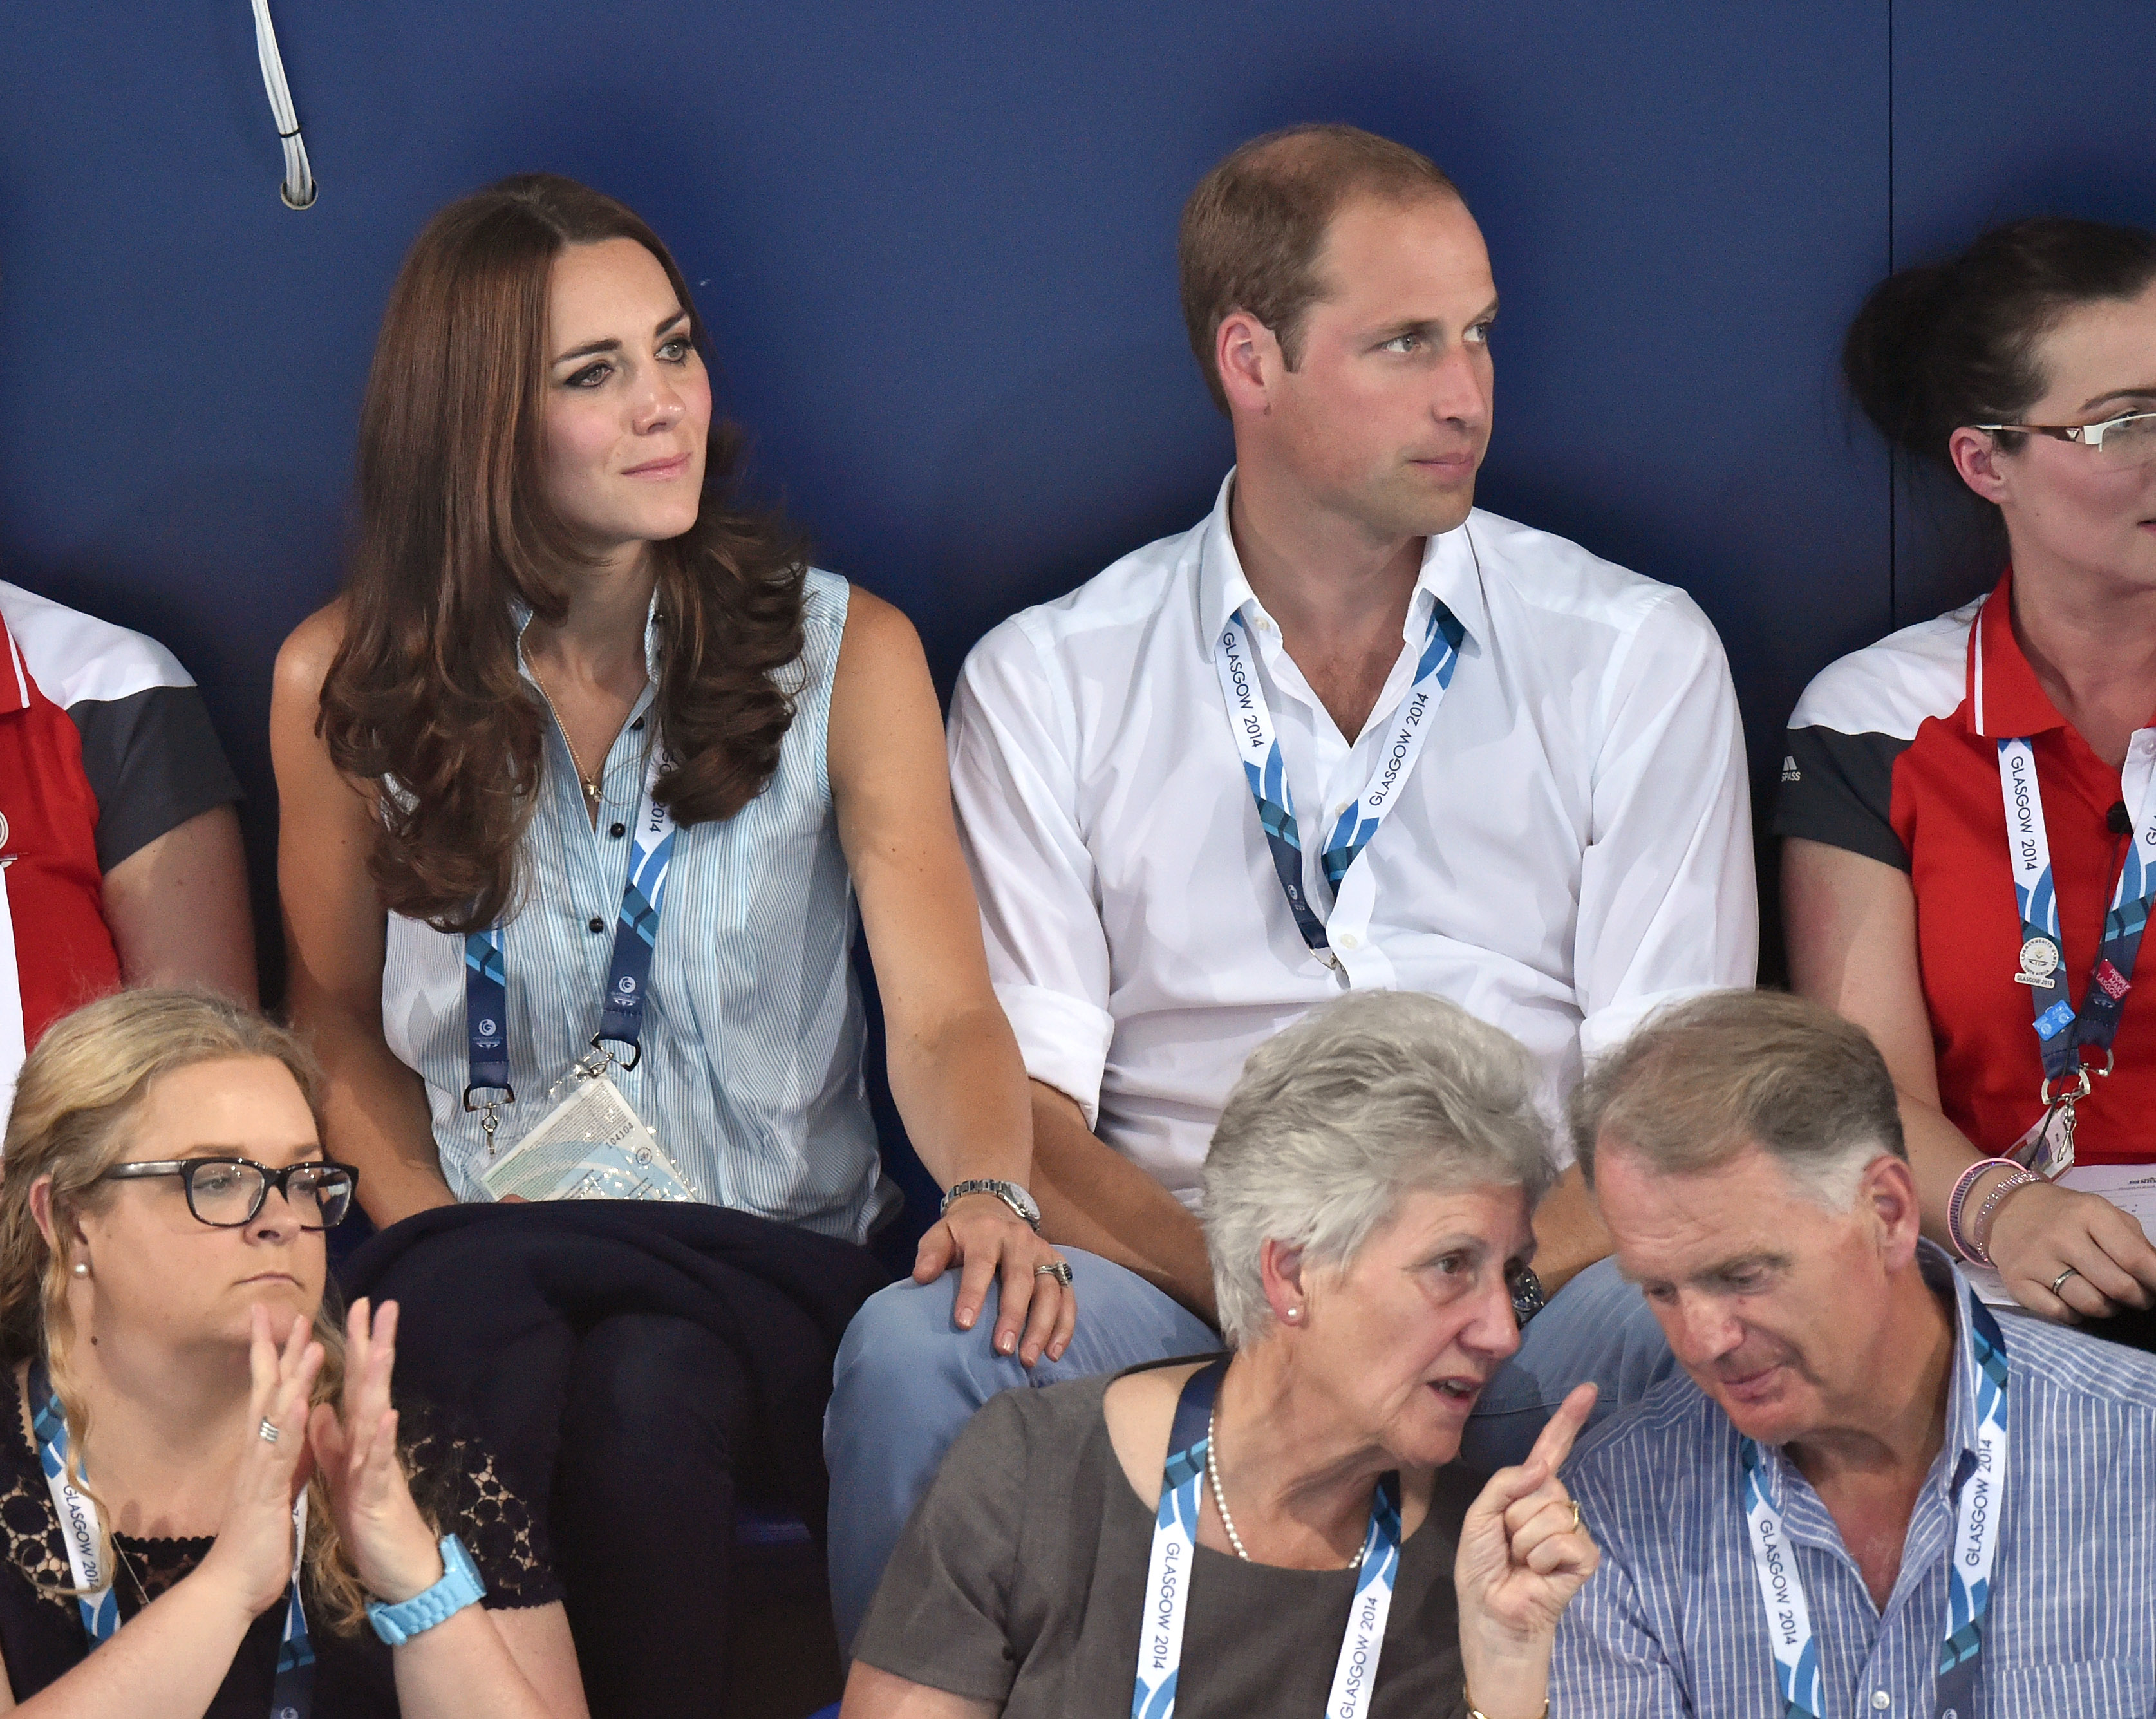 Wills-Kate-Commonwealth-Games (1)